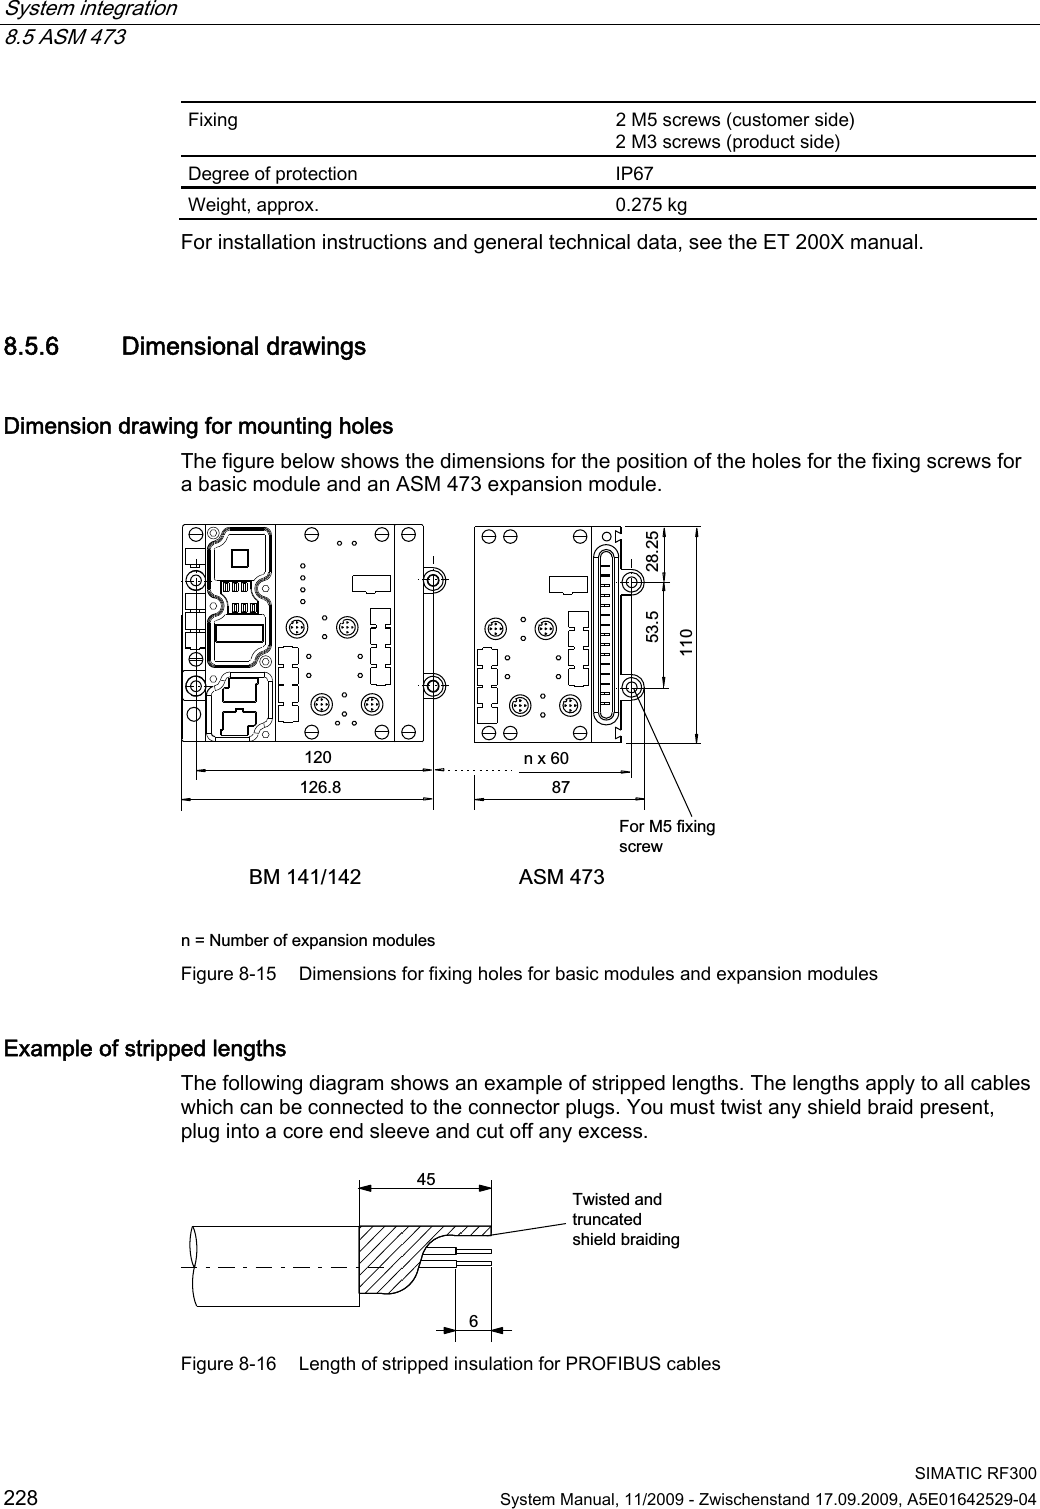 System integration   8.5 ASM 473  SIMATIC RF300 228  System Manual, 11/2009 - Zwischenstand 17.09.2009, A5E01642529-04 Fixing  2 M5 screws (customer side) 2 M3 screws (product side) Degree of protection  IP67 Weight, approx.  0.275 kg For installation instructions and general technical data, see the ET 200X manual. 8.5.6 Dimensional drawings Dimension drawing for mounting holes The figure below shows the dimensions for the position of the holes for the fixing screws for a basic module and an ASM 473 expansion module. %0 $60bQ[  Q 1XPEHURIH[SDQVLRQPRGXOHV)RU0IL[LQJVFUHZ Figure 8-15  Dimensions for fixing holes for basic modules and expansion modules Example of stripped lengths The following diagram shows an example of stripped lengths. The lengths apply to all cables which can be connected to the connector plugs. You must twist any shield braid present, plug into a core end sleeve and cut off any excess. 7ZLVWHGDQGWUXQFDWHGVKLHOGEUDLGLQJ Figure 8-16  Length of stripped insulation for PROFIBUS cables 